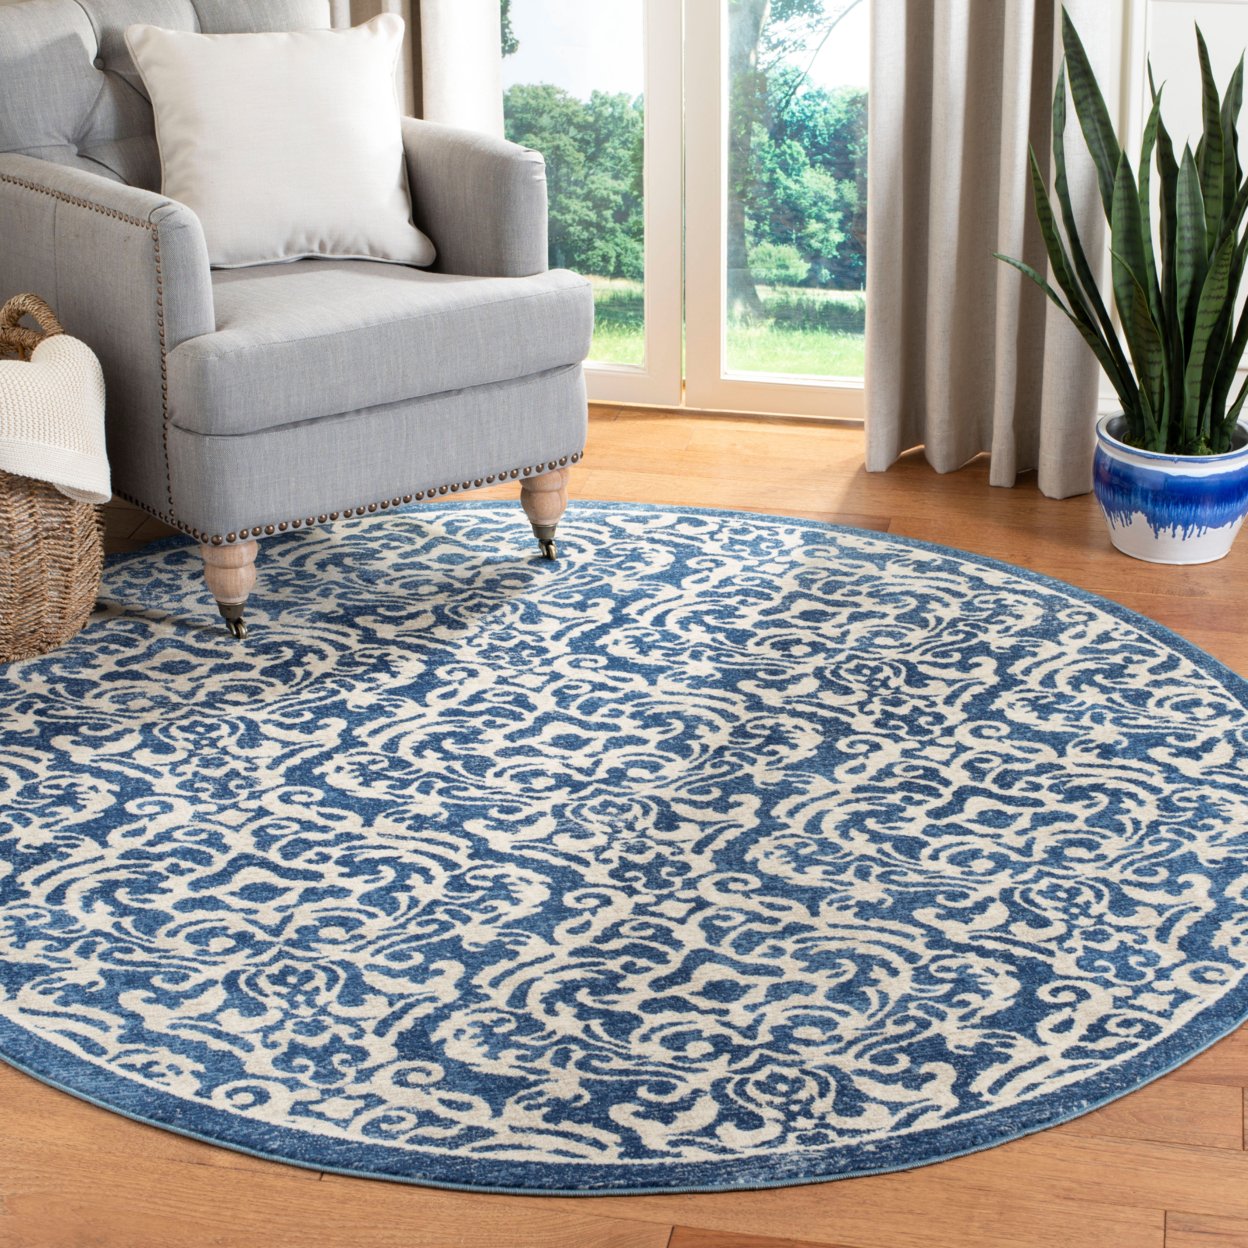 SAFAVIEH Brentwood Collection BNT810N Navy / Creme Rug - 2' X 14'